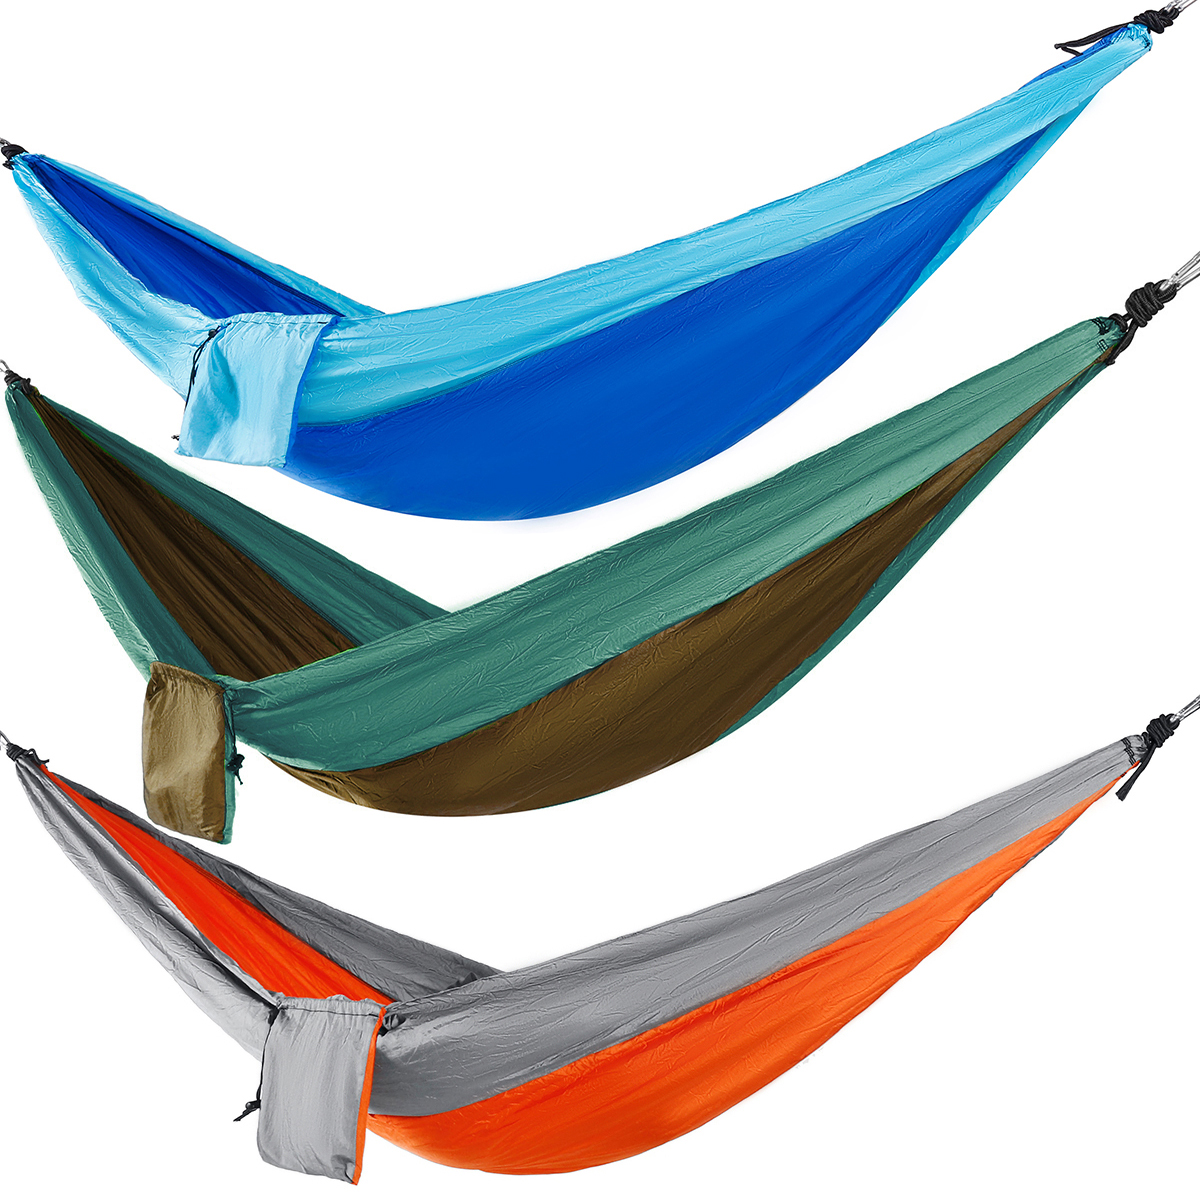 IPReereg-Double-Person-Hammock-Nylon-Swing-Hanging-Bed-Outdoor-Camping-Travel-Max-Load-300kg-1742182-4